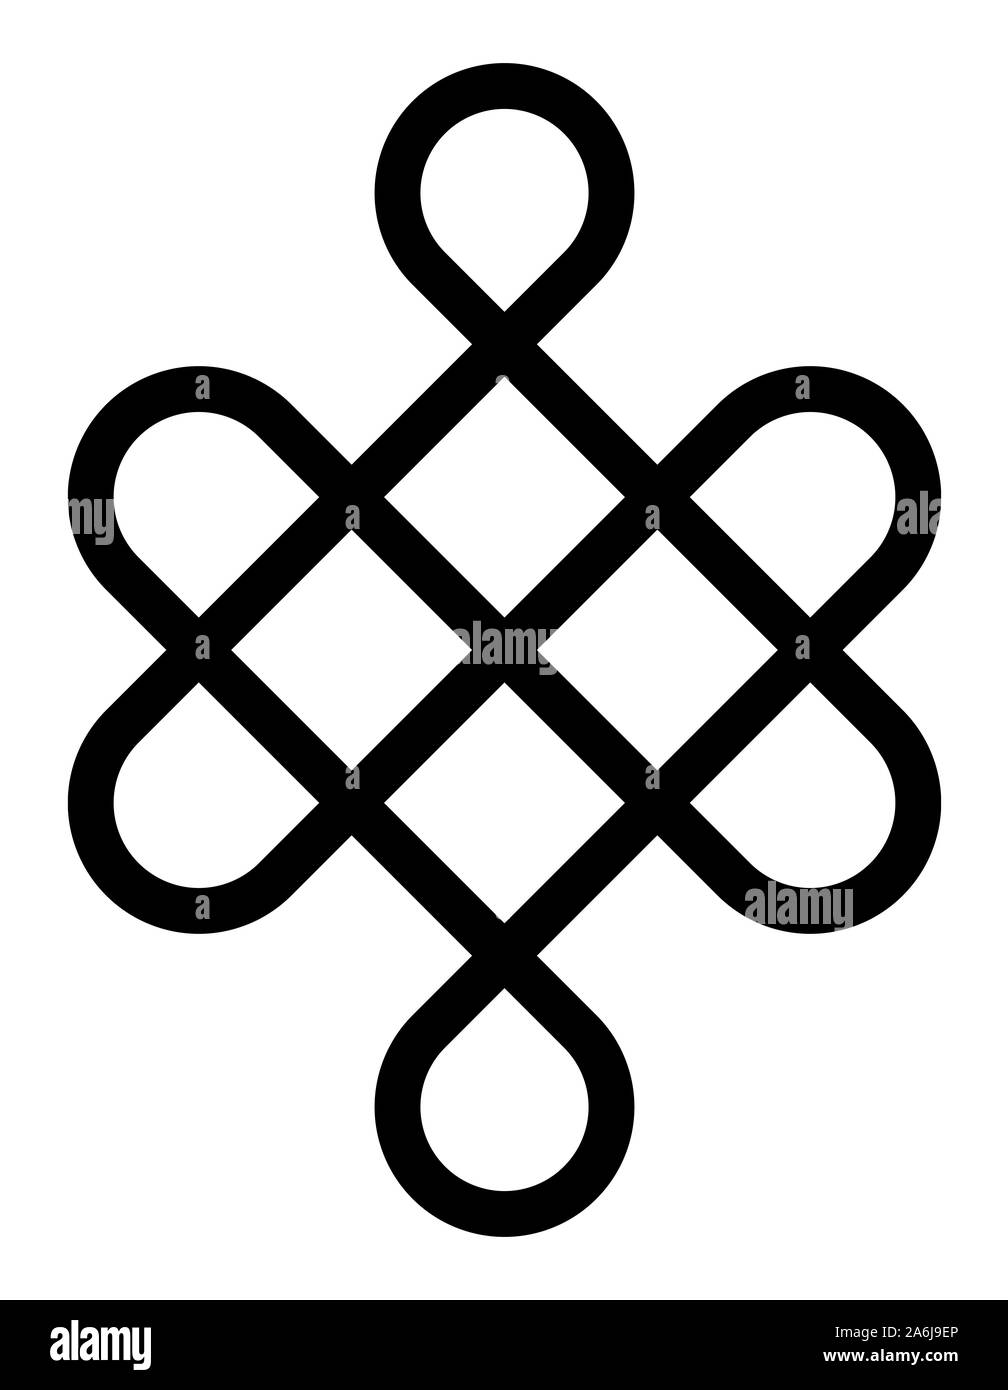 Celtic knot symbol with a white background Stock Photo